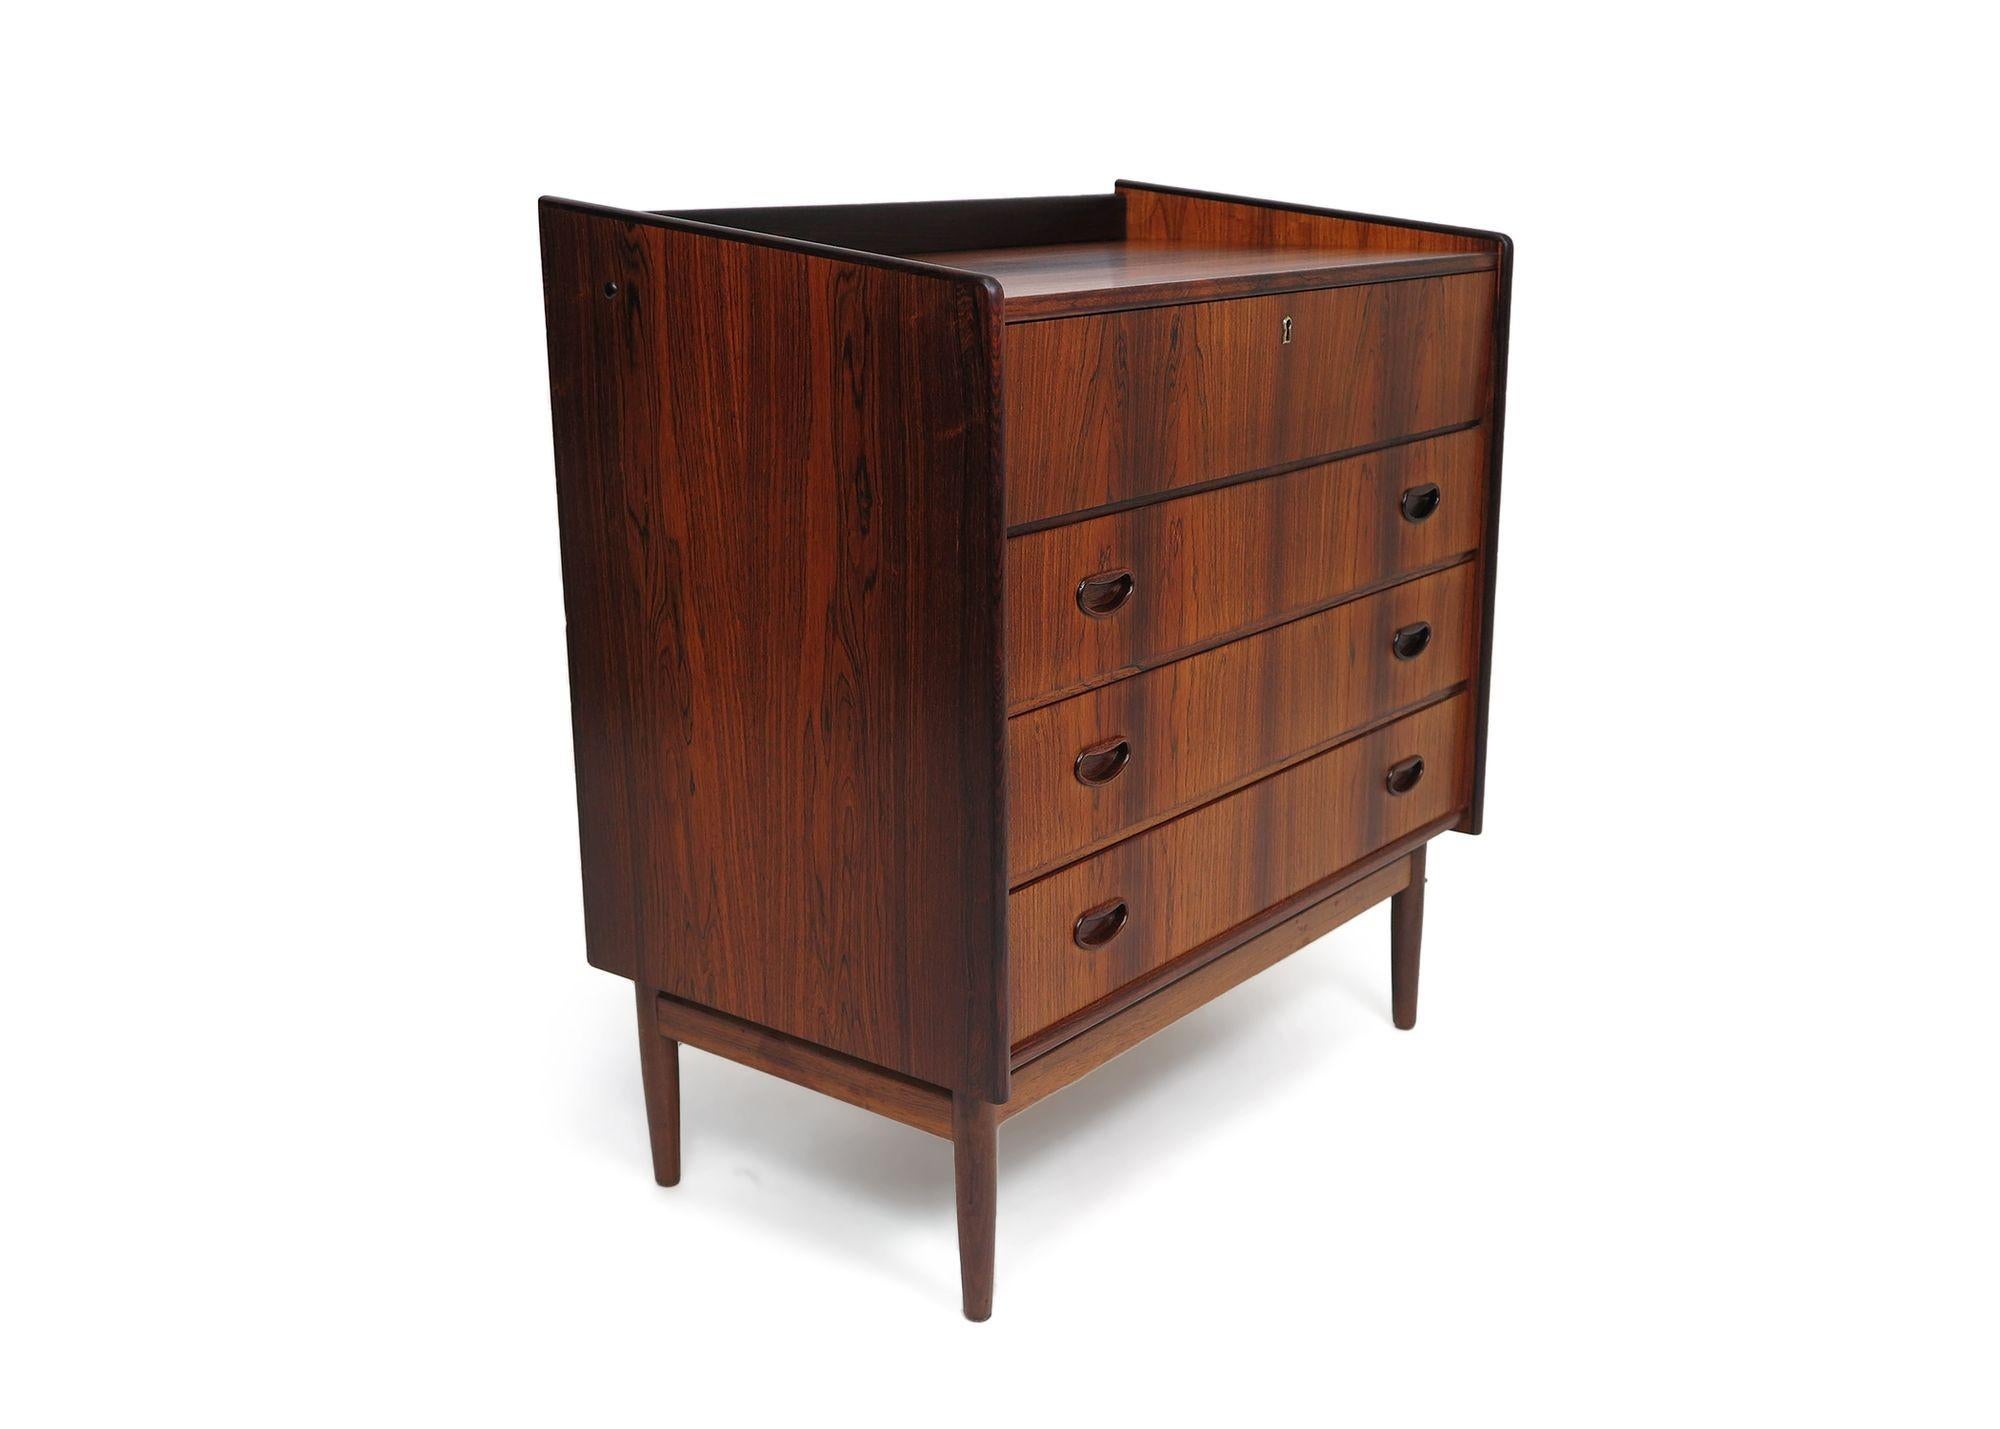 circa 1955 Brazilian rosewood vanity with flip-top mirror and lights. Crafted of stunning Brazilian Rosewood with dark grains and dynamic book-matched patterns across the front of drawers and sides. The secretary features a locking flip-top vanity